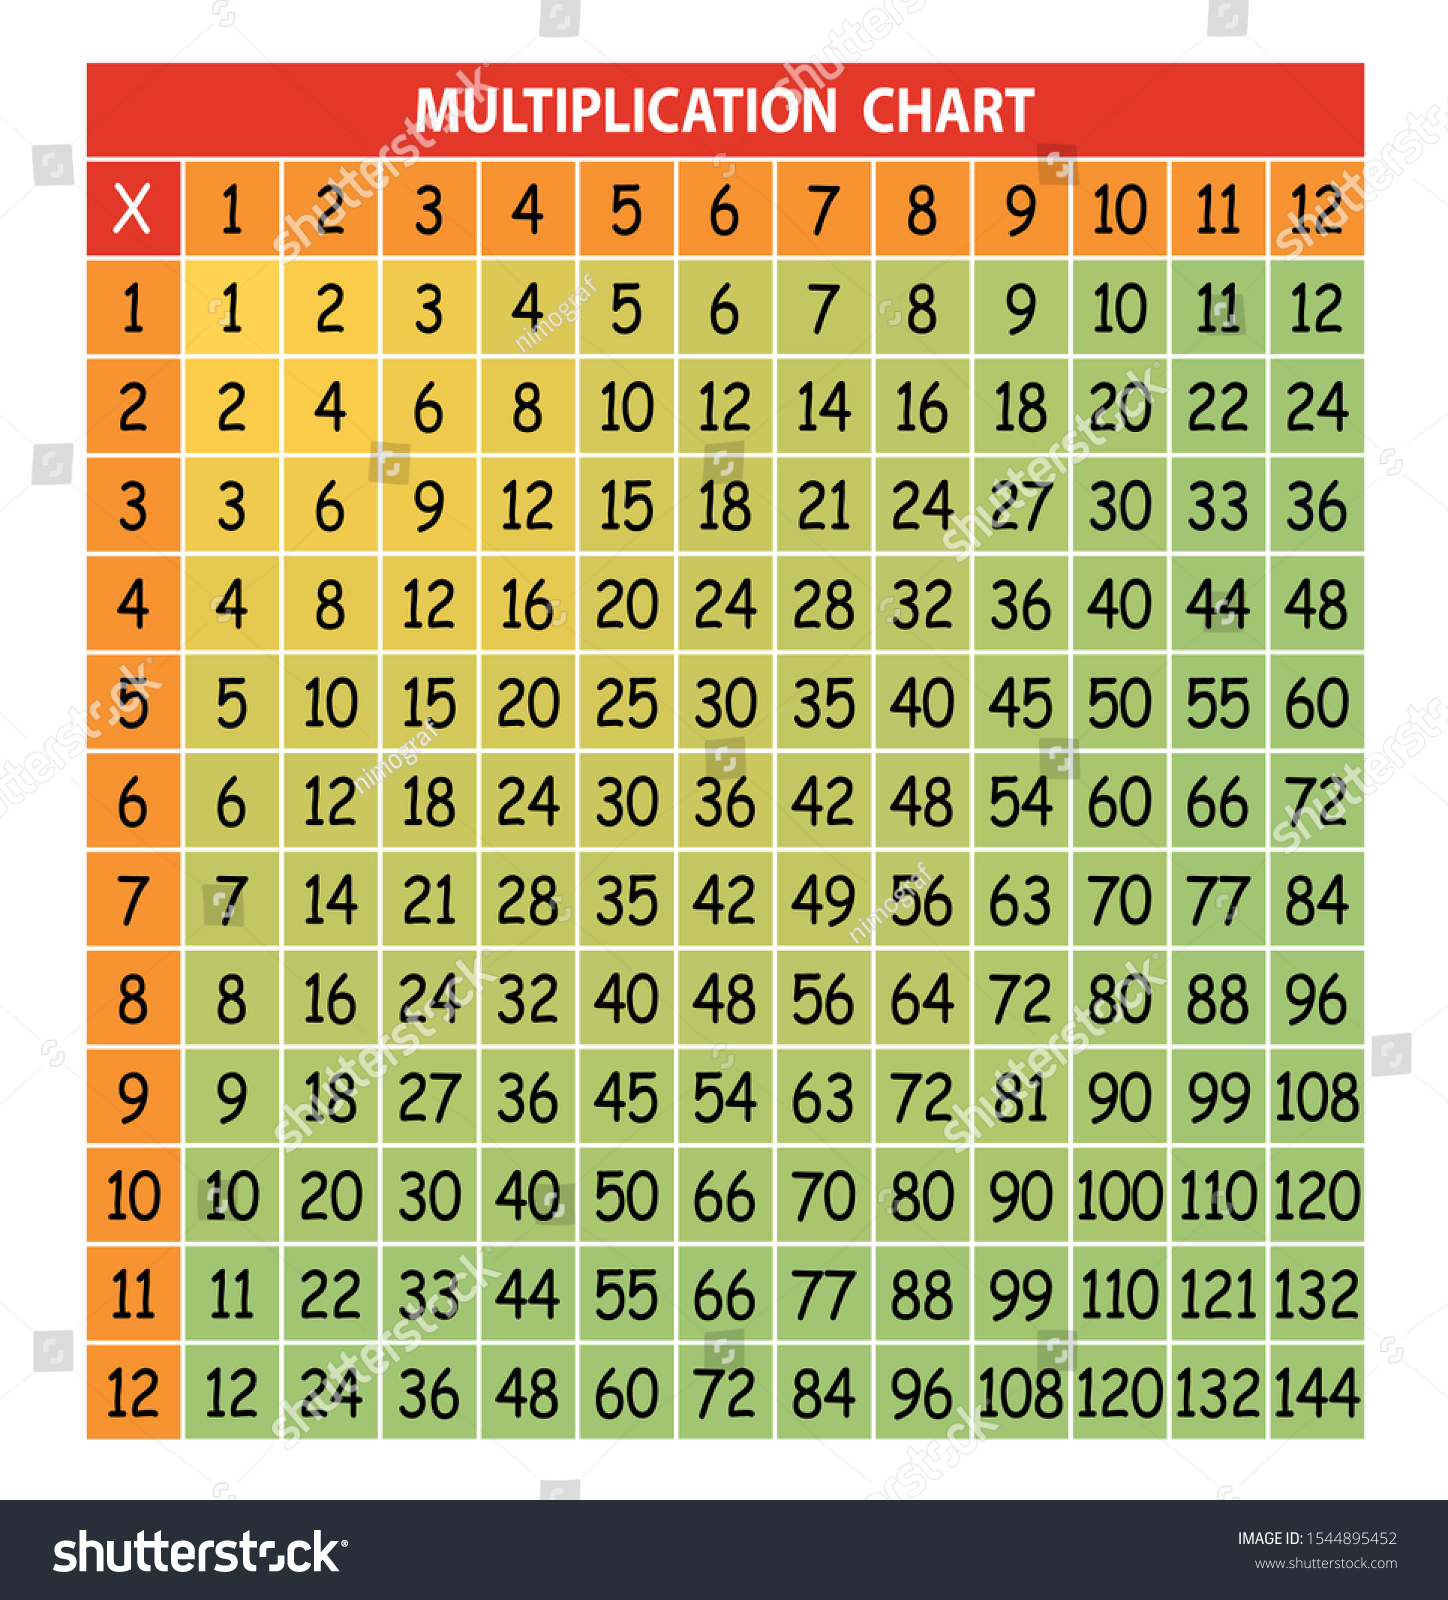 multiplication chart education colorful multiplication table stock vector royalty free 1544895452